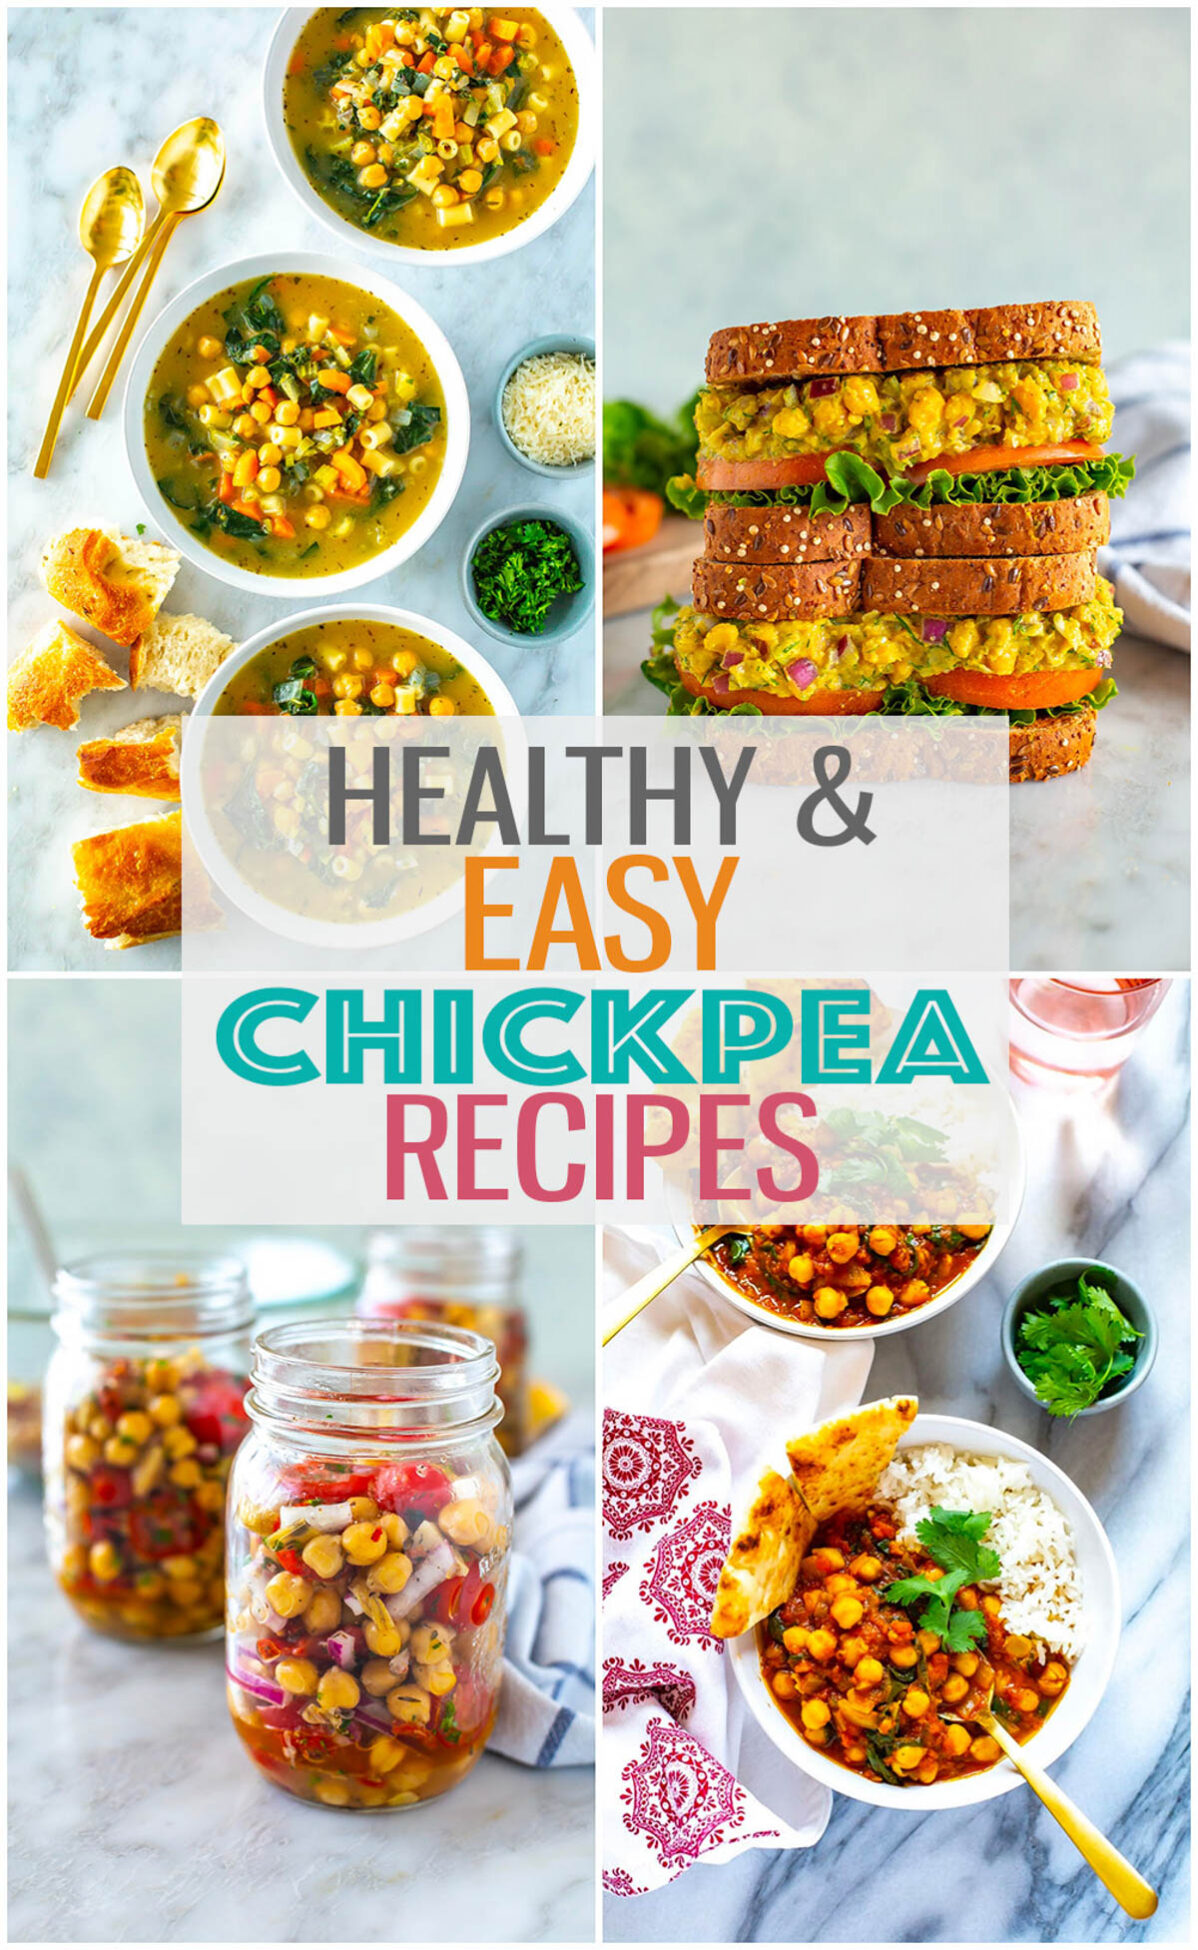 A collage of 4 different chickpea recipes with the text "Healthy & Easy Chickpea Recipes" layered over top.